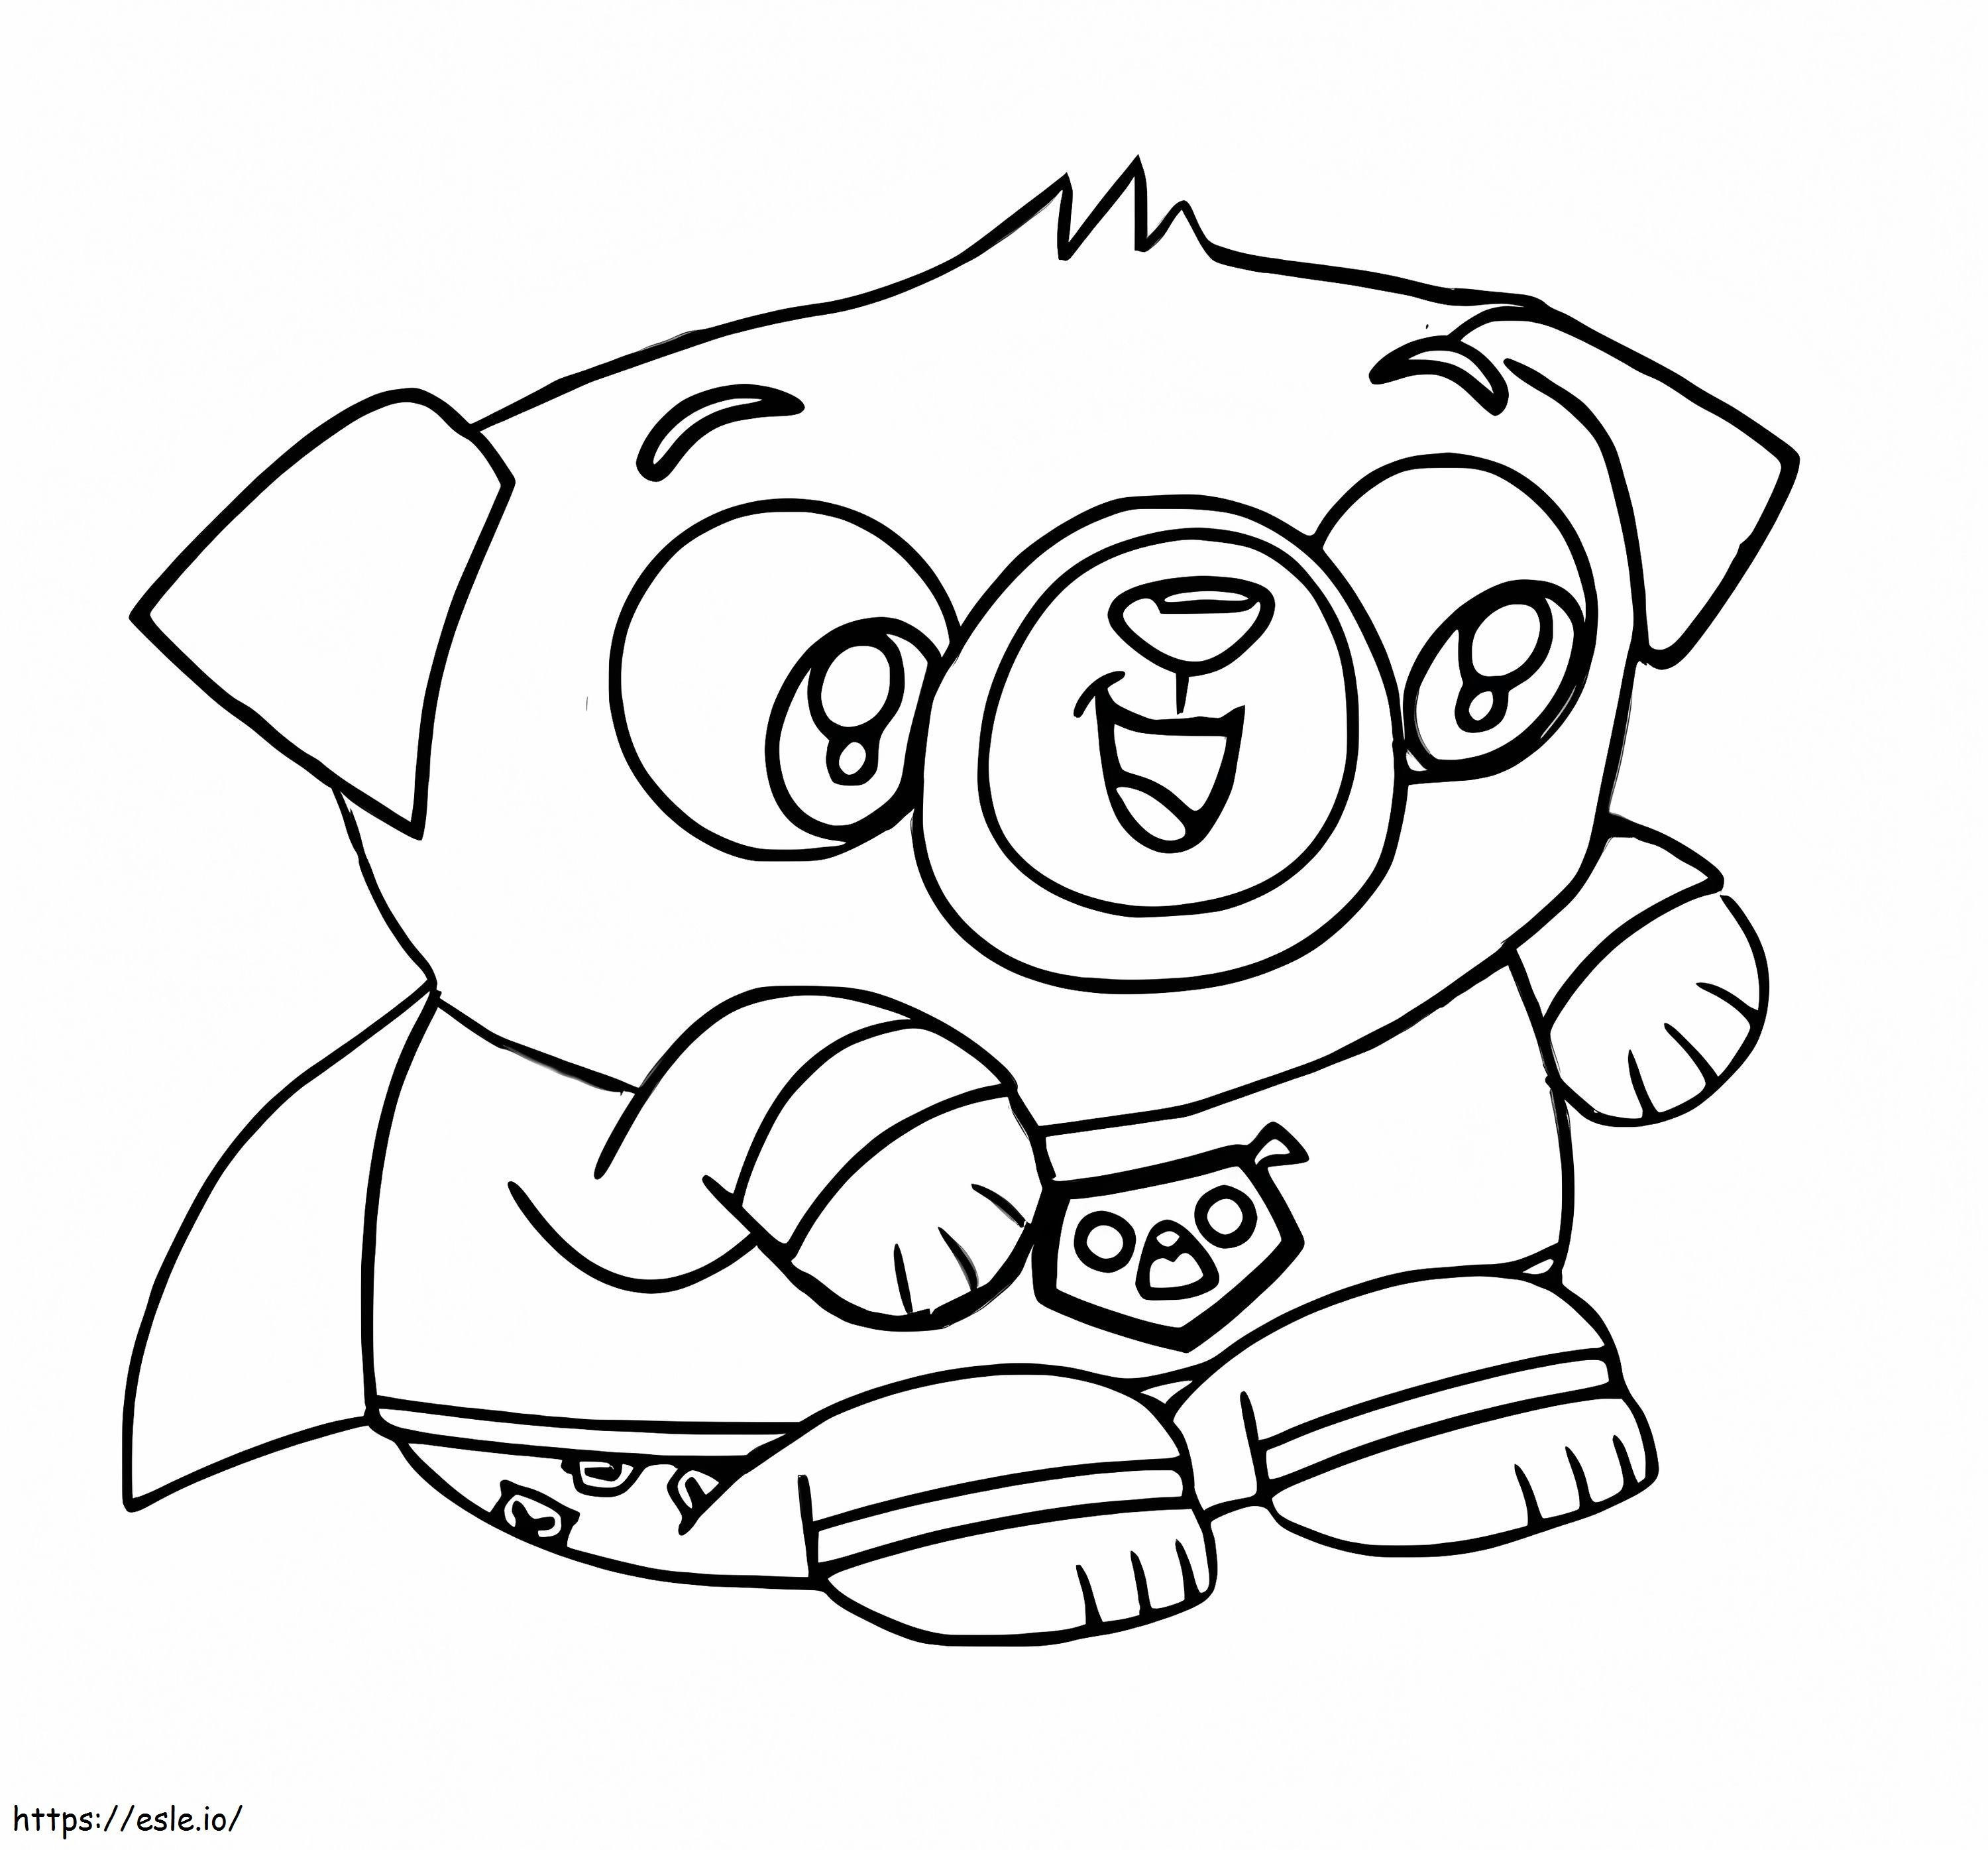 Spud Pug From Chip And Potato coloring page